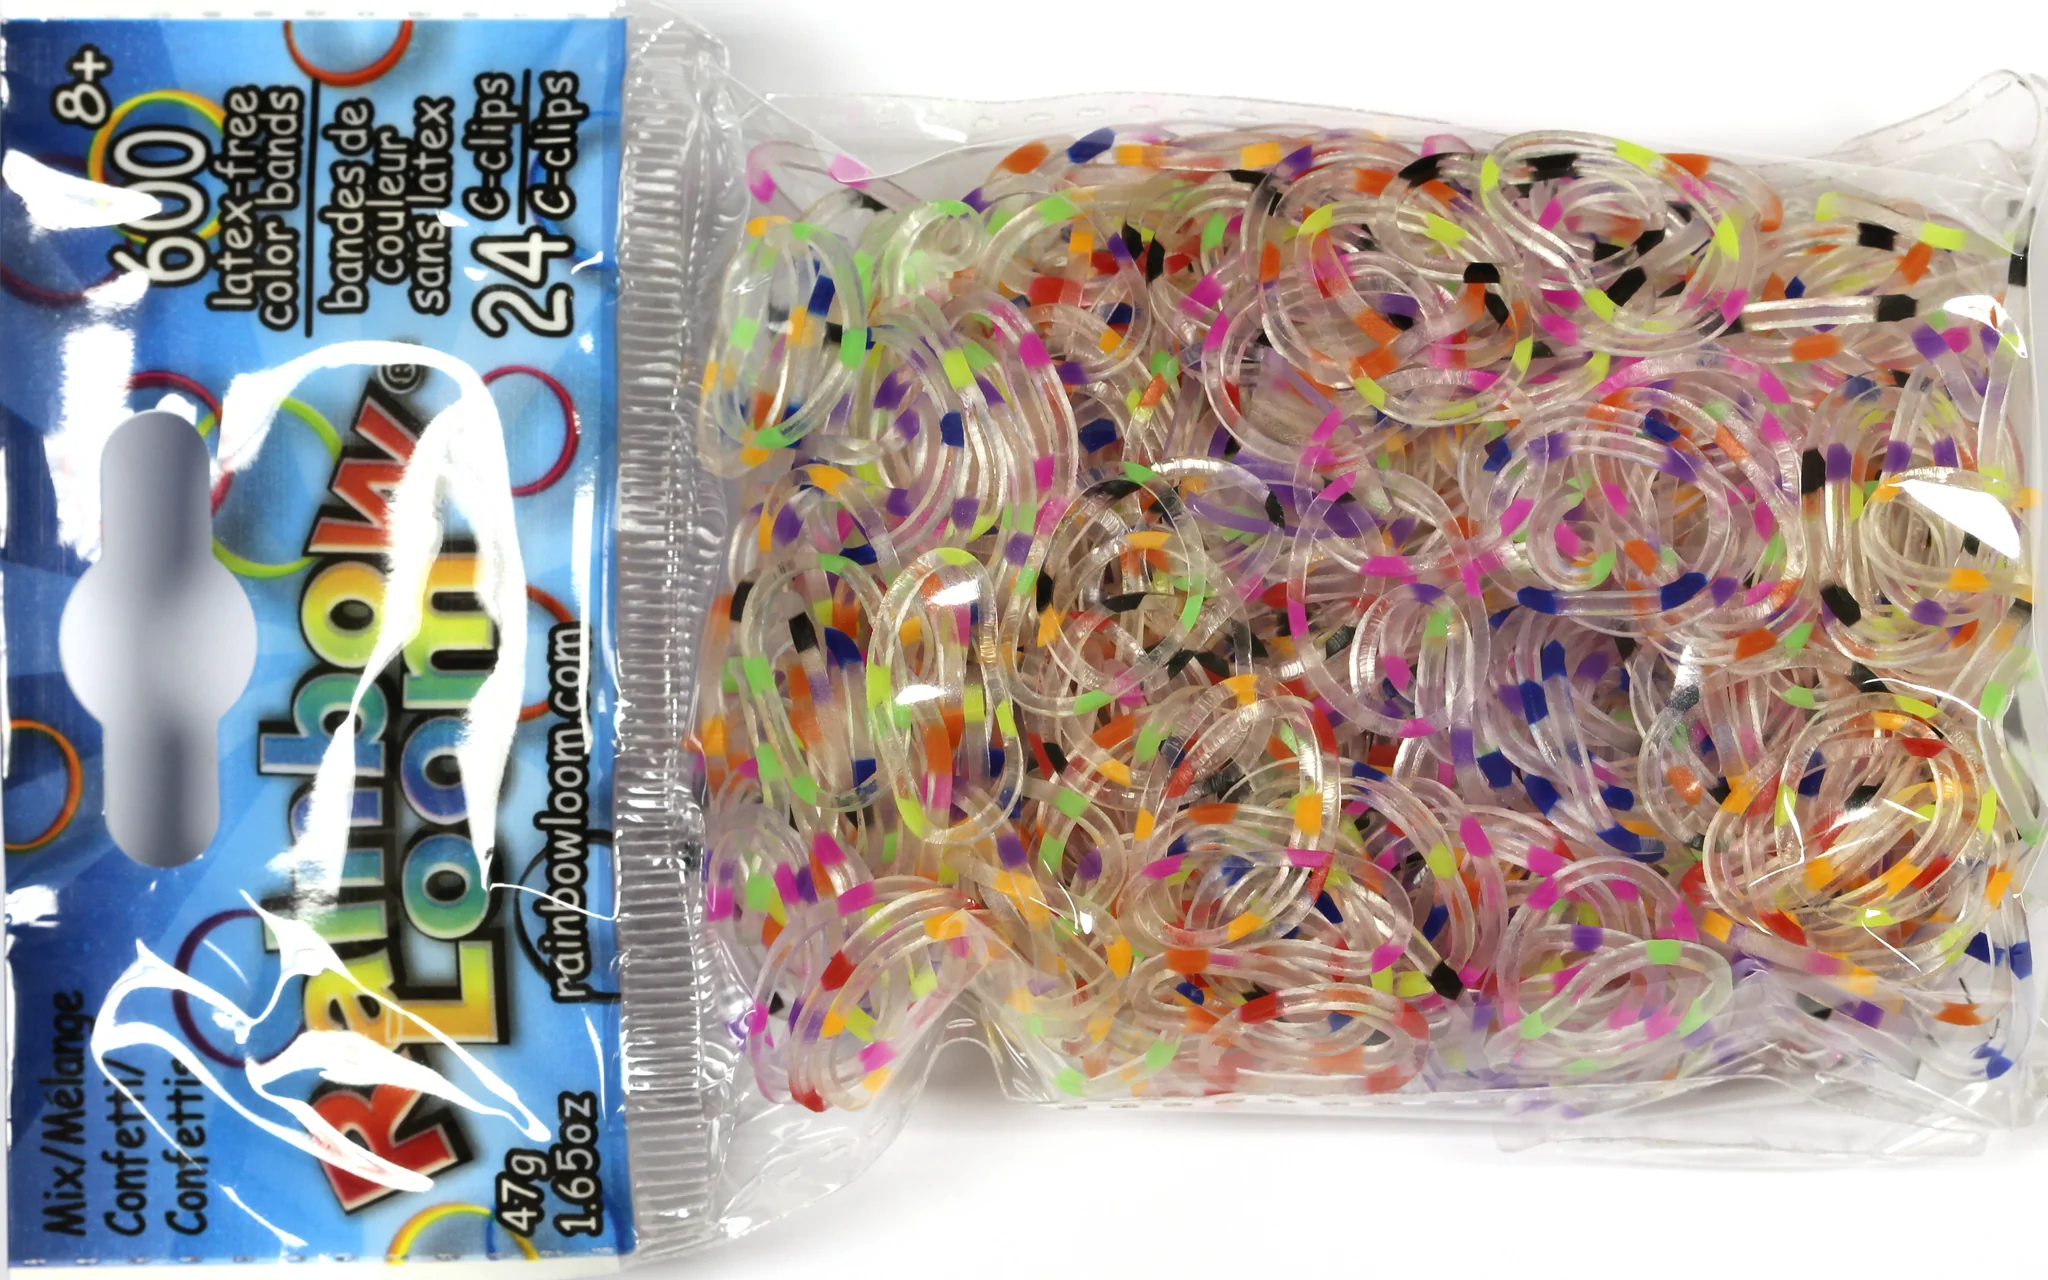 Rainbow Loom Bands (Confetti Mix) - A2Z Science & Learning Toy Store